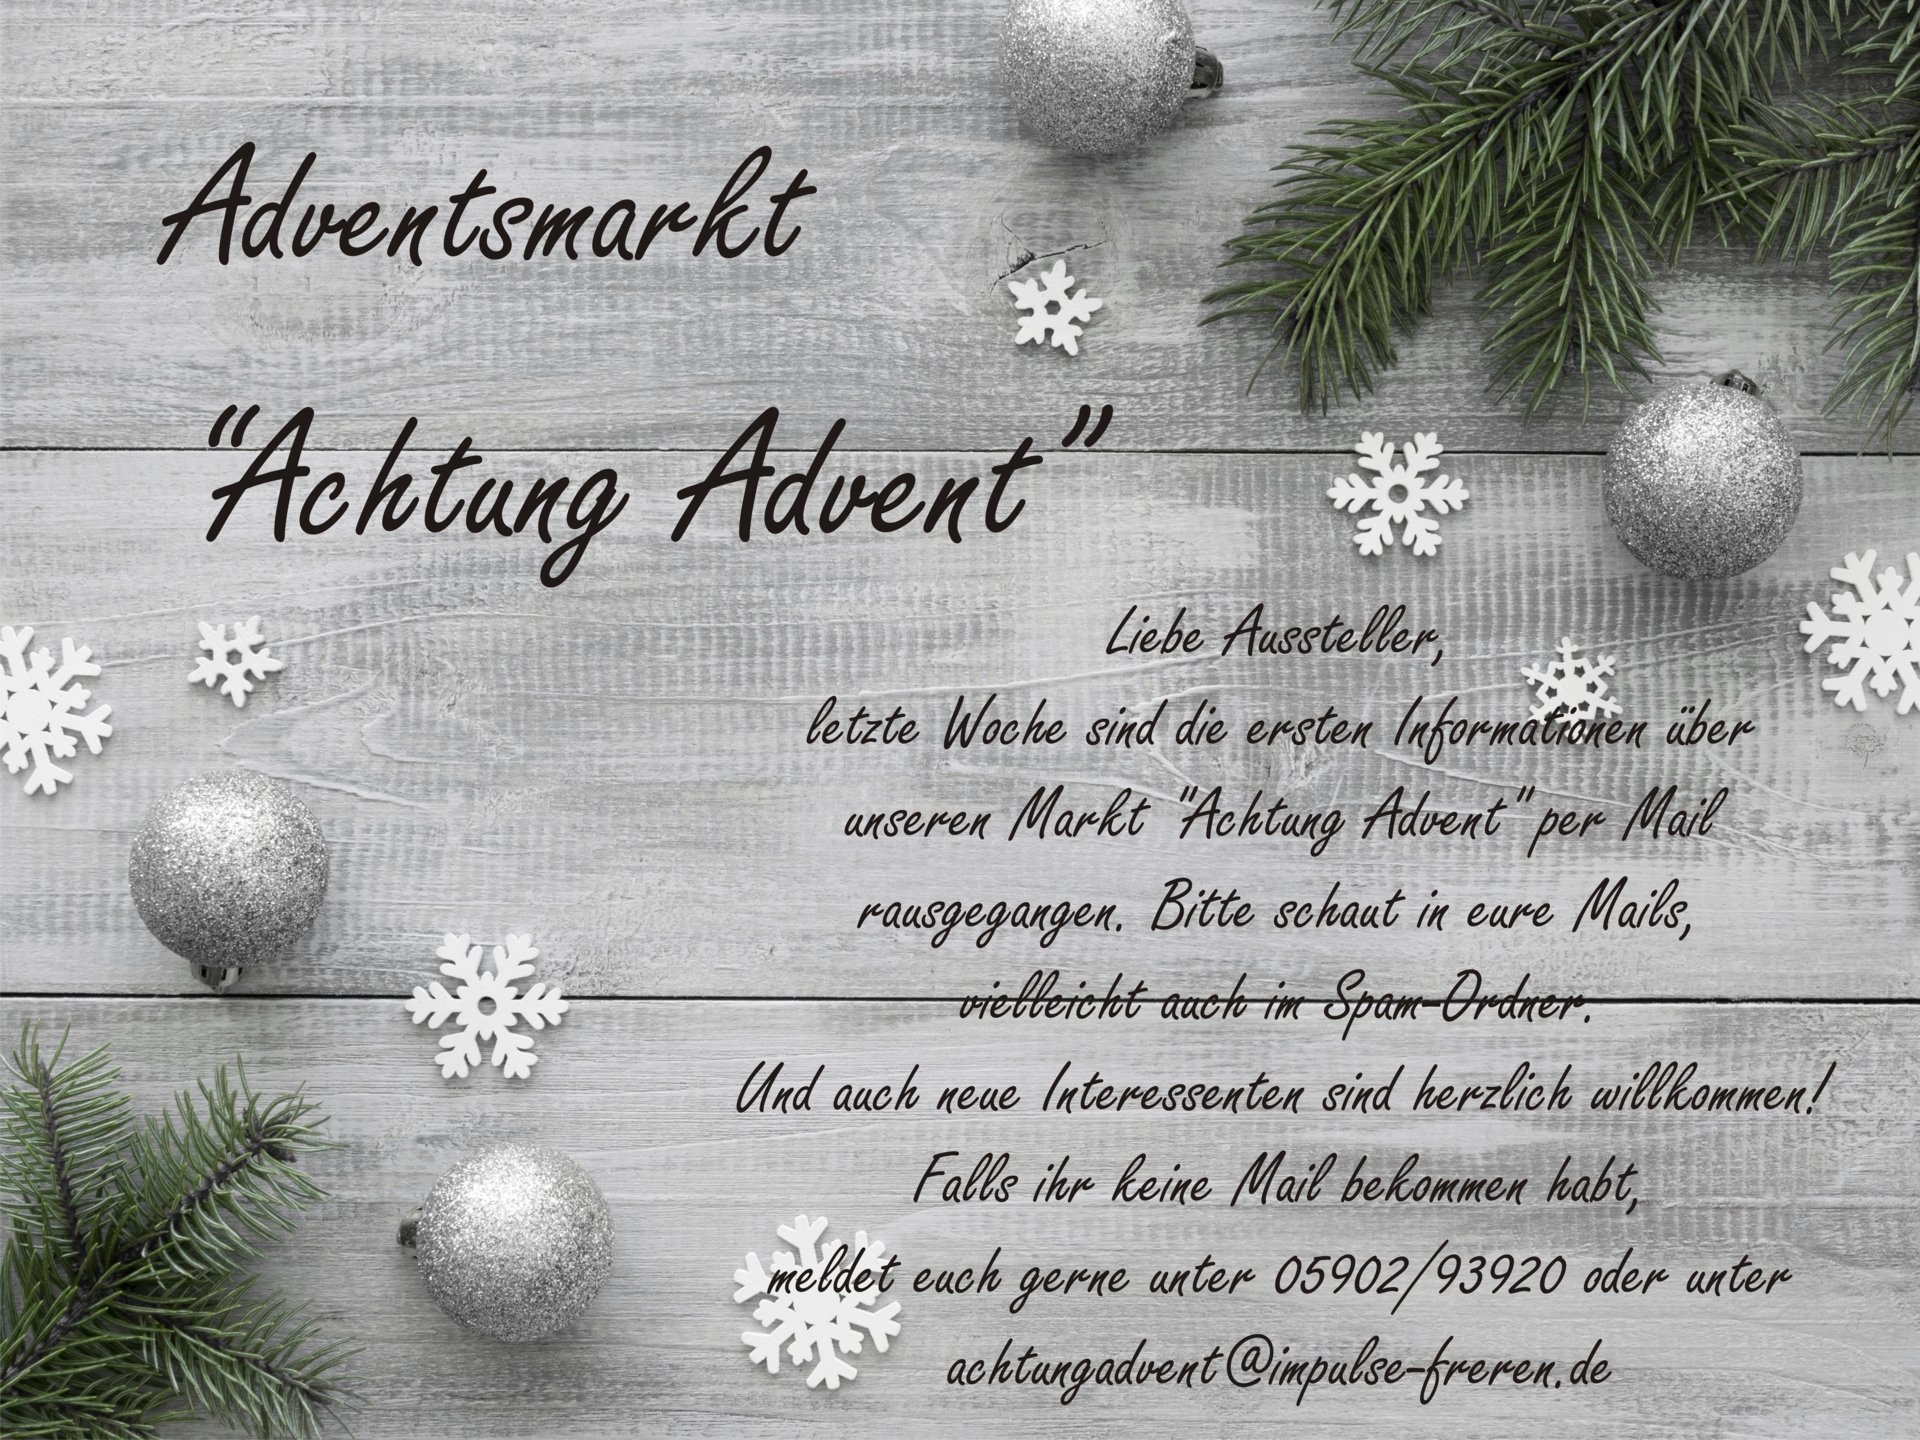 Achtung Advent